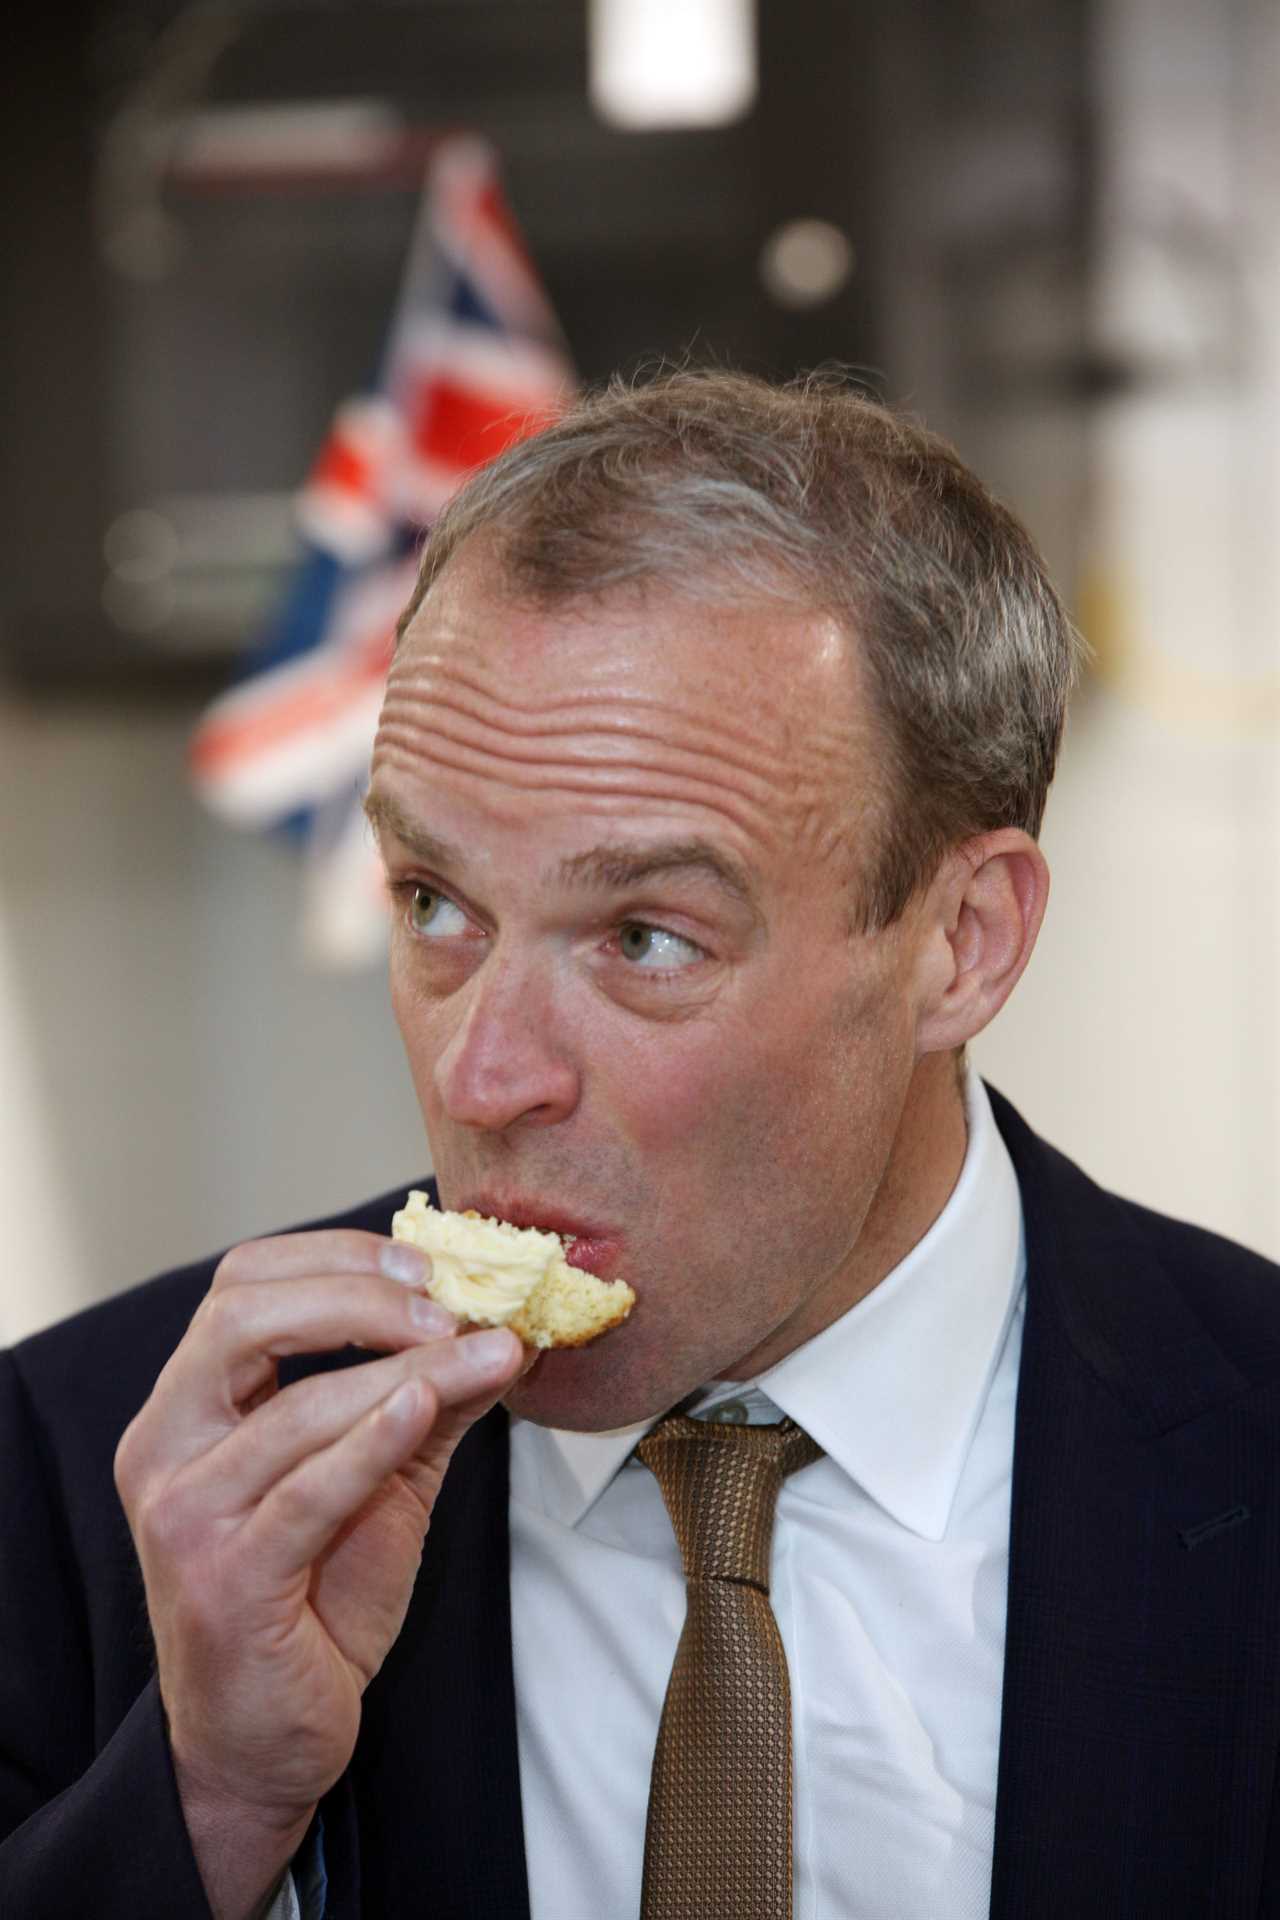 Prisoners cooking cakes will keep Britain’s streets safer declares Dominic Raab